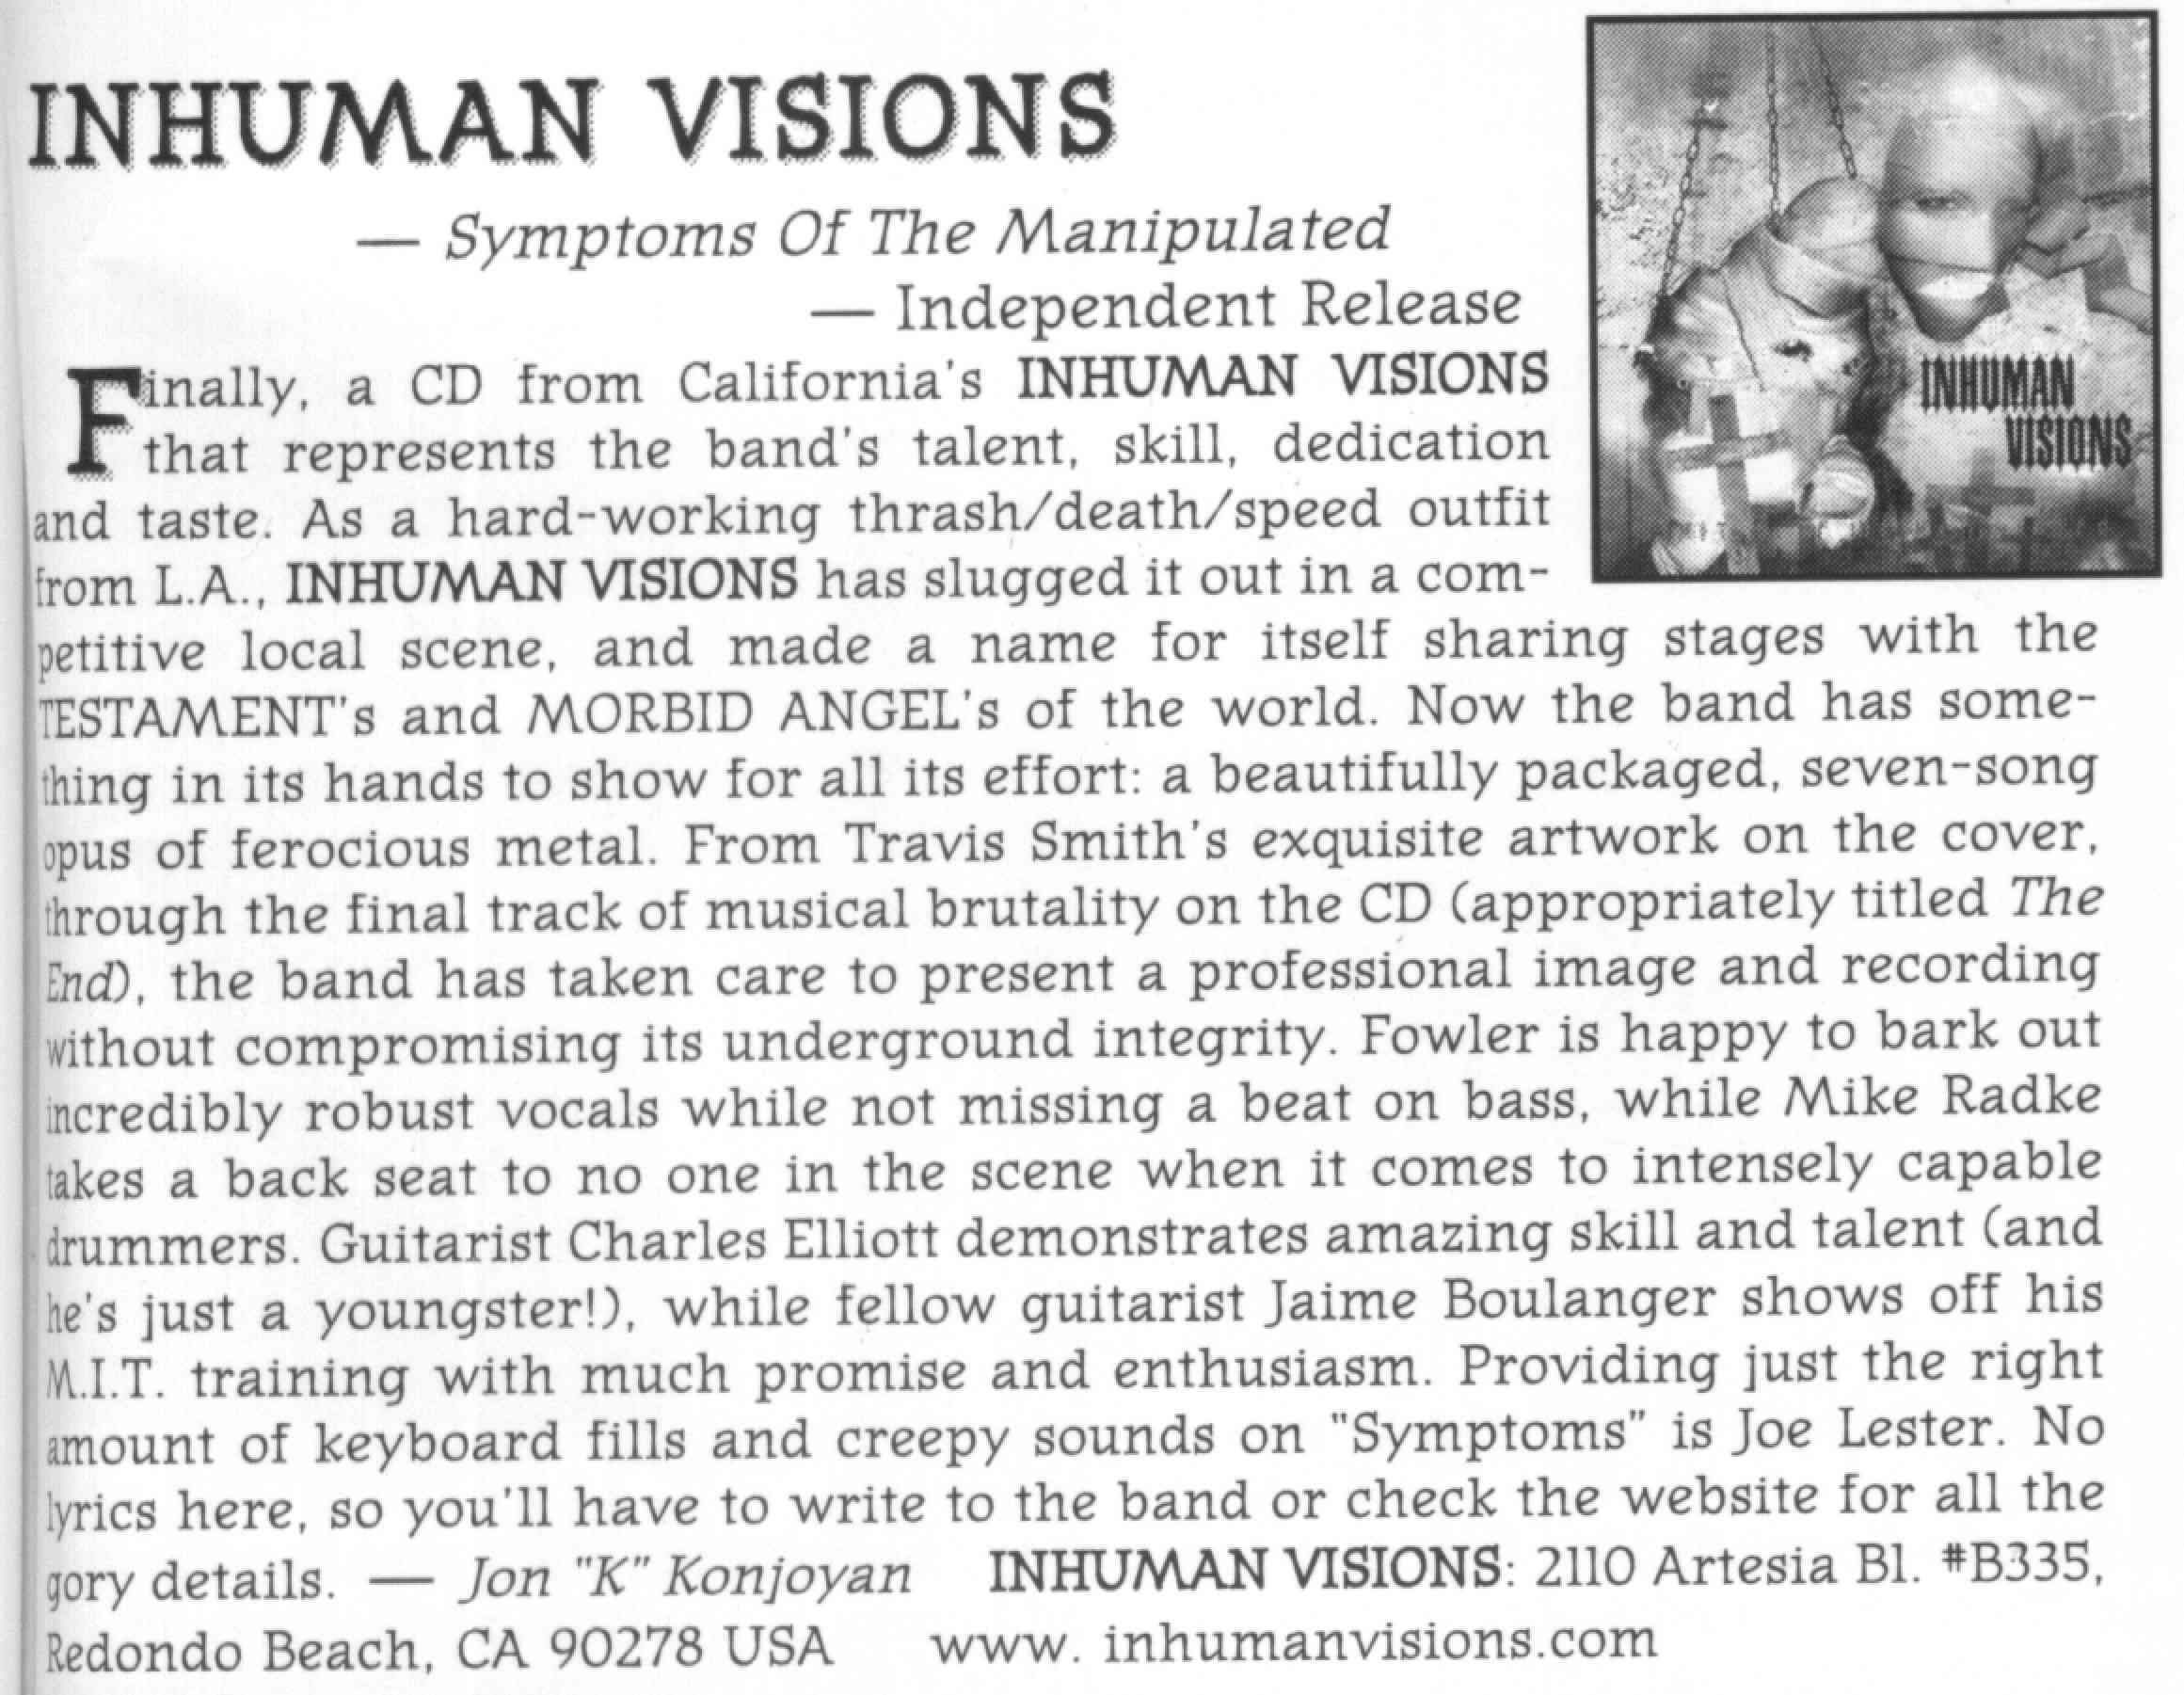 Image: Album Review of Inhuman Visions in Pit Magazine, Summer 2001